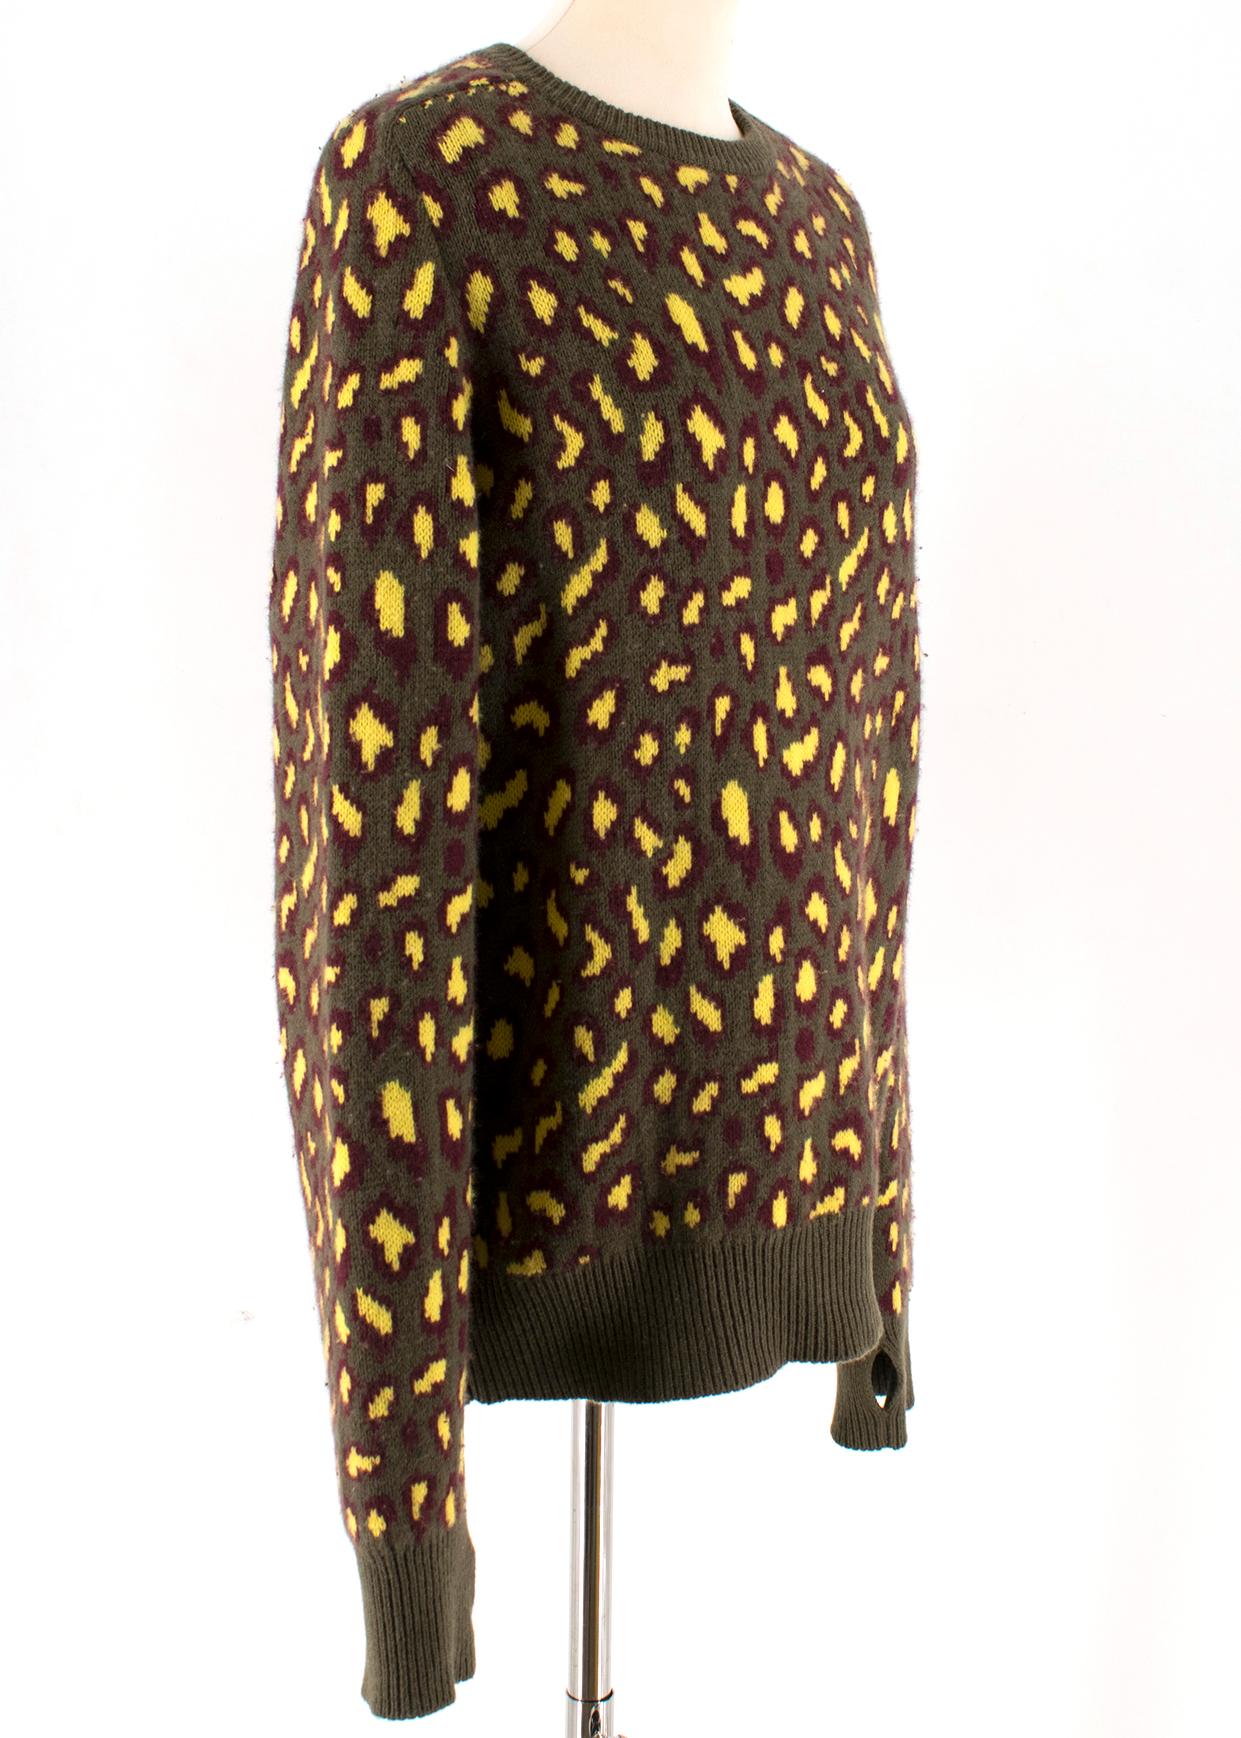 Christopher Kane Khaki & Yellow Leopard Print Cashmere Sweater

- cashmere sweater
- khaki and yellow leopard print 
- round neckline
- rib trim

Please note, these items are pre-owned and may show some signs of storage, even when unworn and unused.